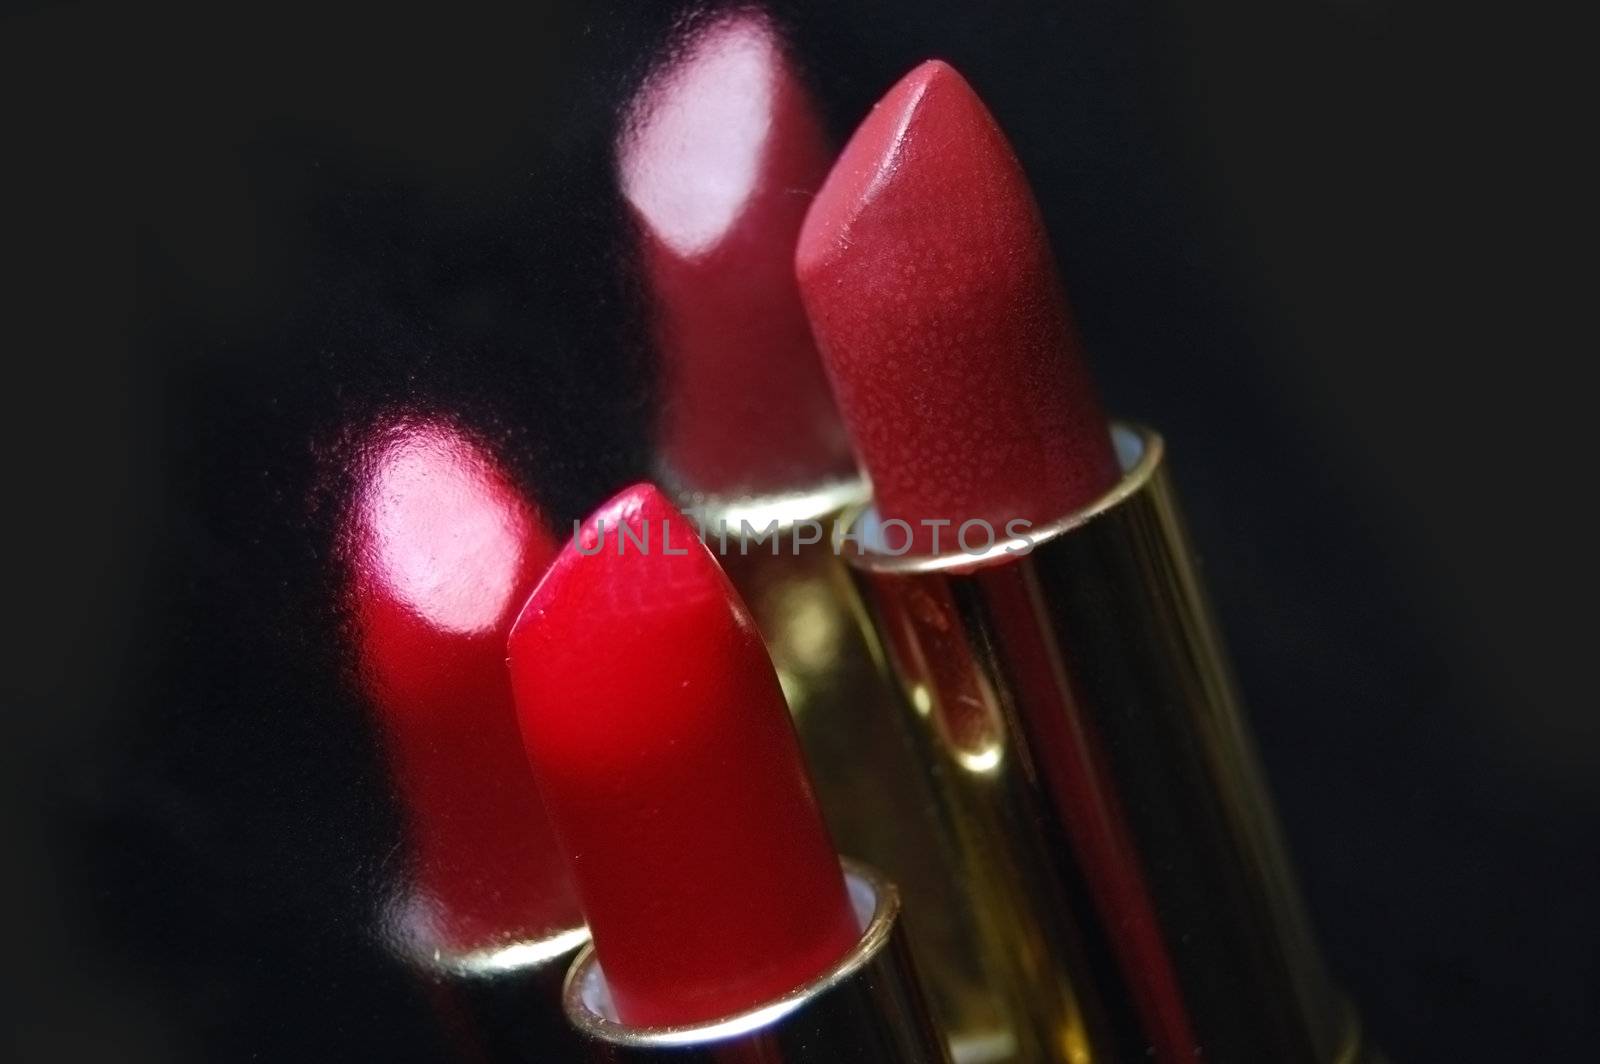 Two lipsticks with its reflection on black